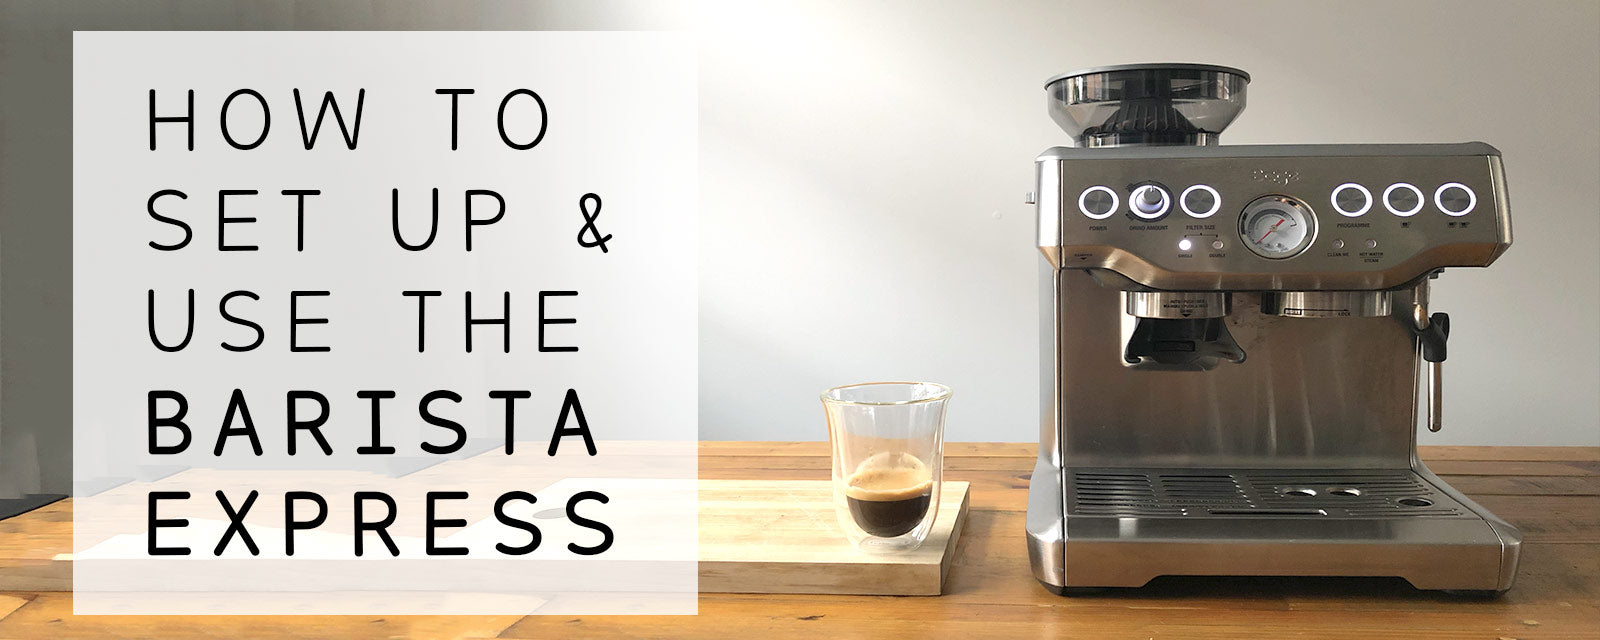 How to set up and make great coffee with Barista Express